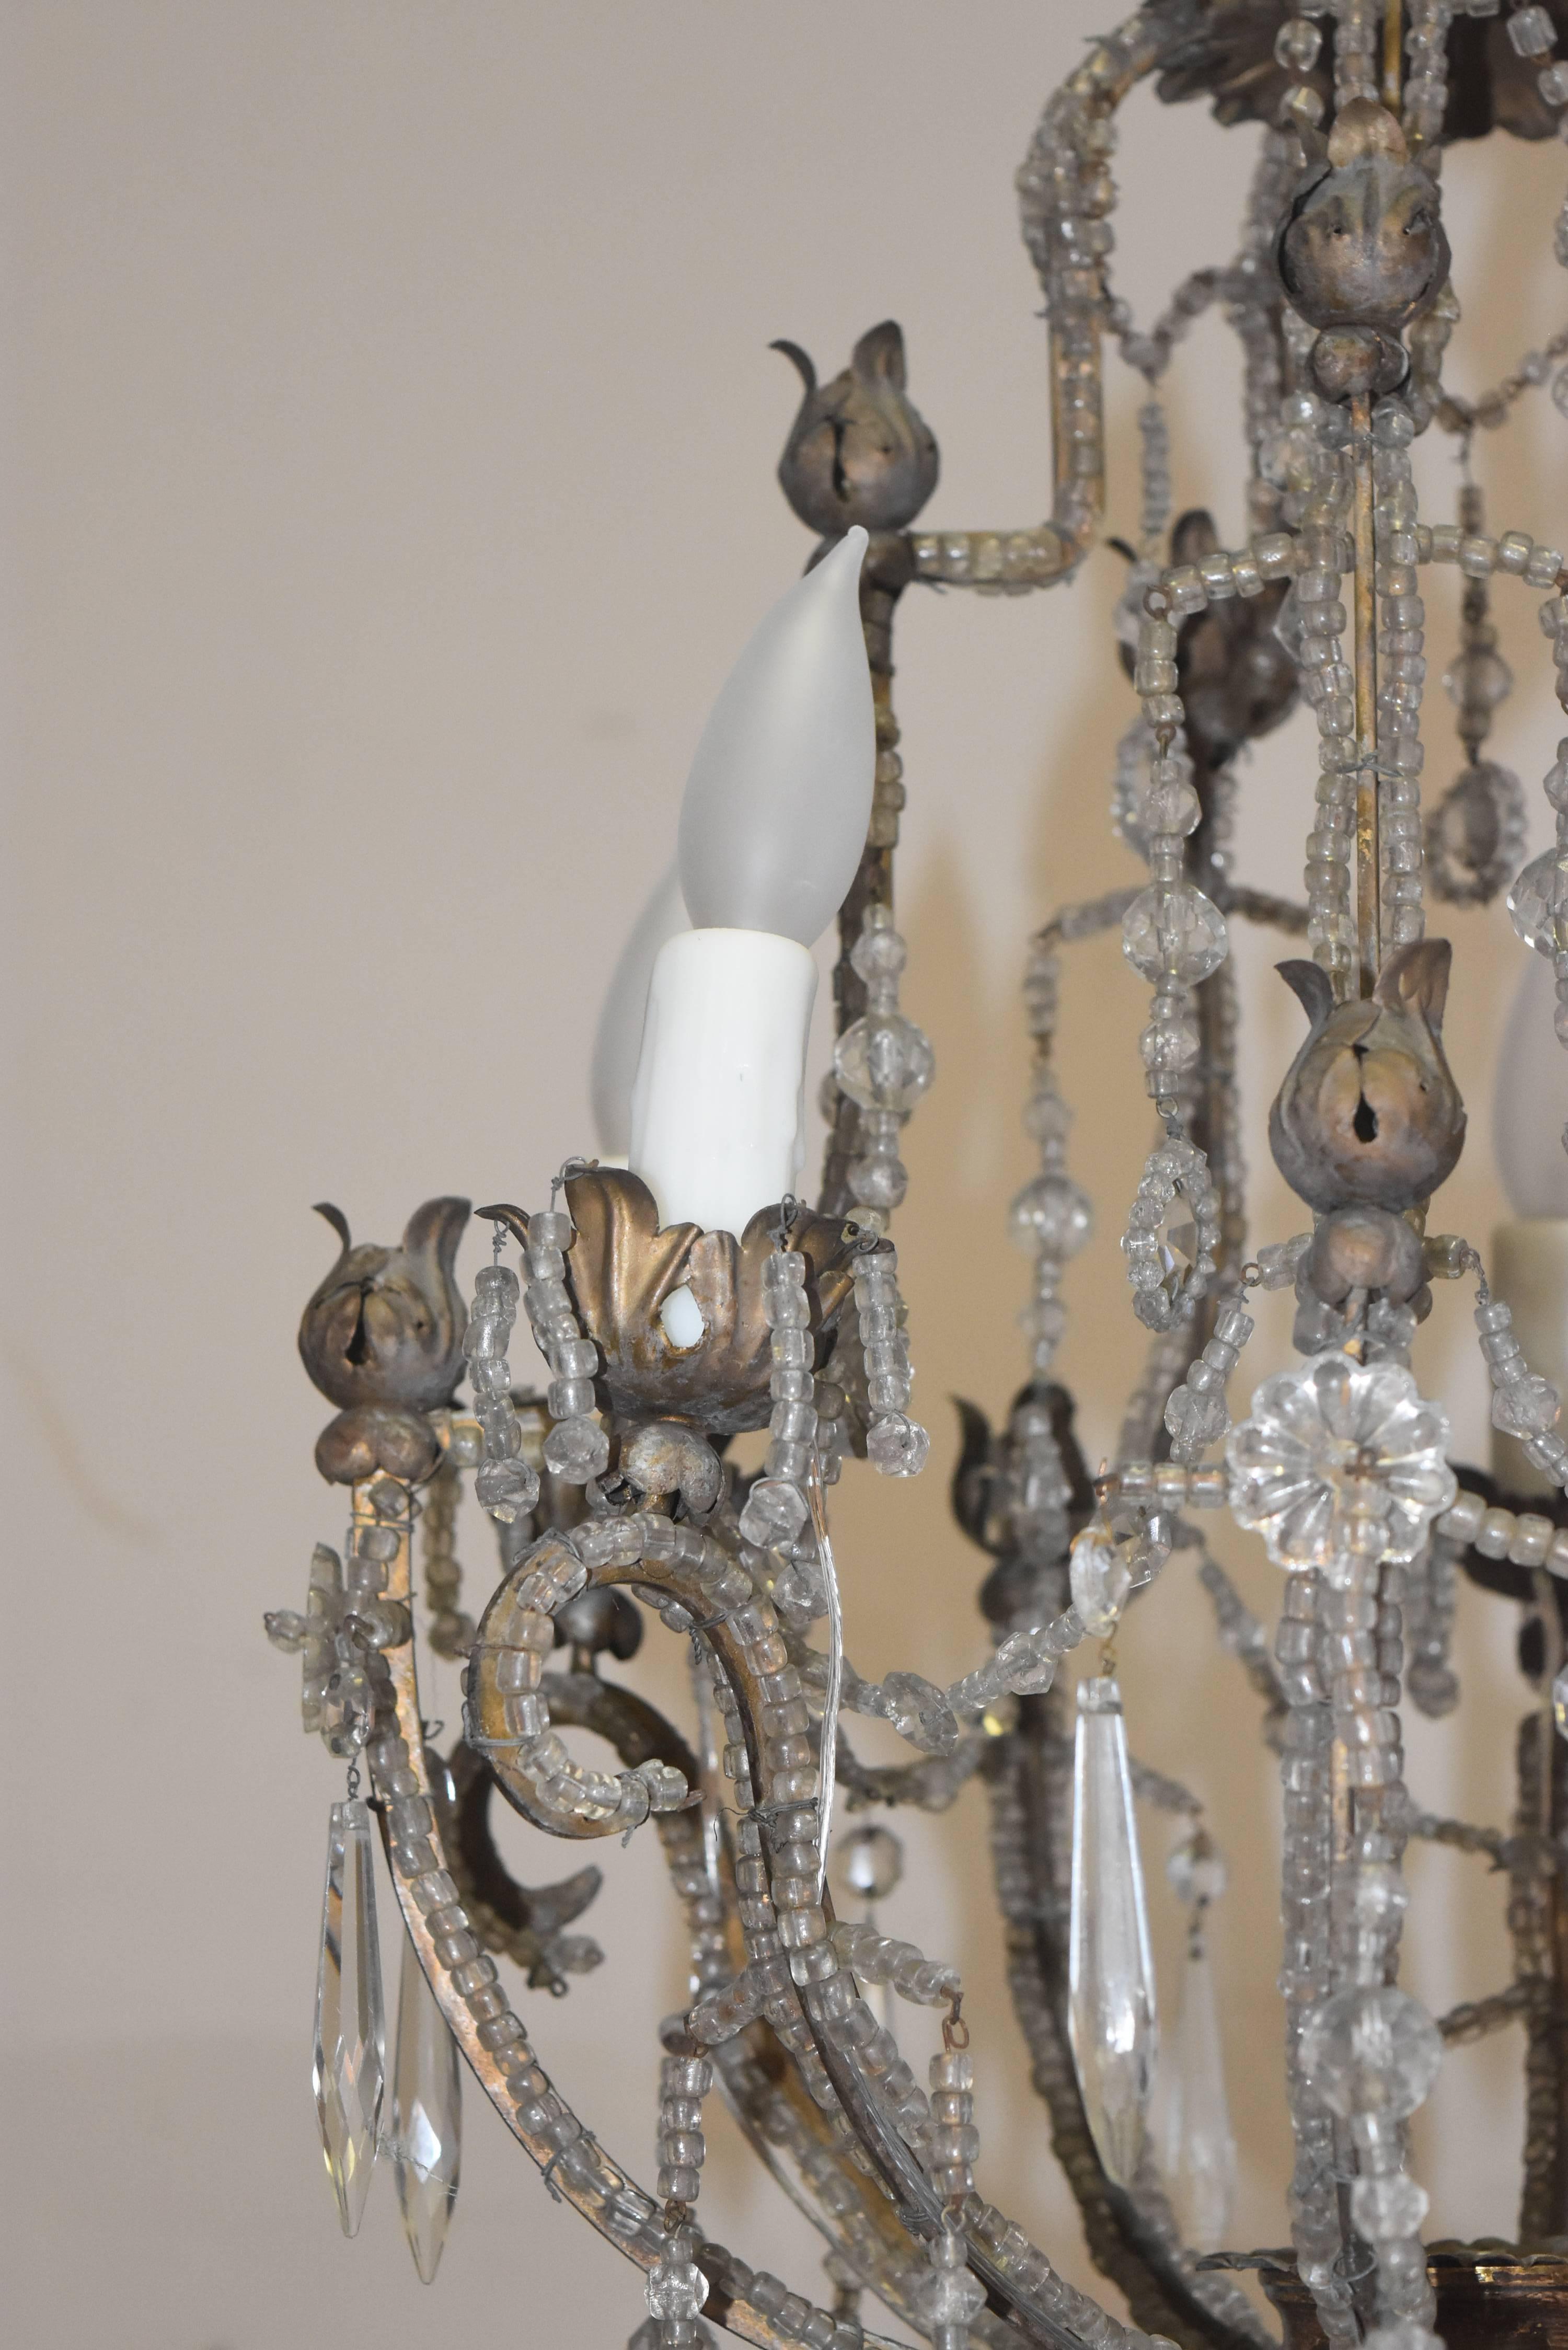 This little gem is a crystal chandelier from Italy that is wrapped in beads and has the original filagree metal pieces that it hangs from instead of a chain. It has been newly wired so it's read to go. Measures: 19 W x 26 T.